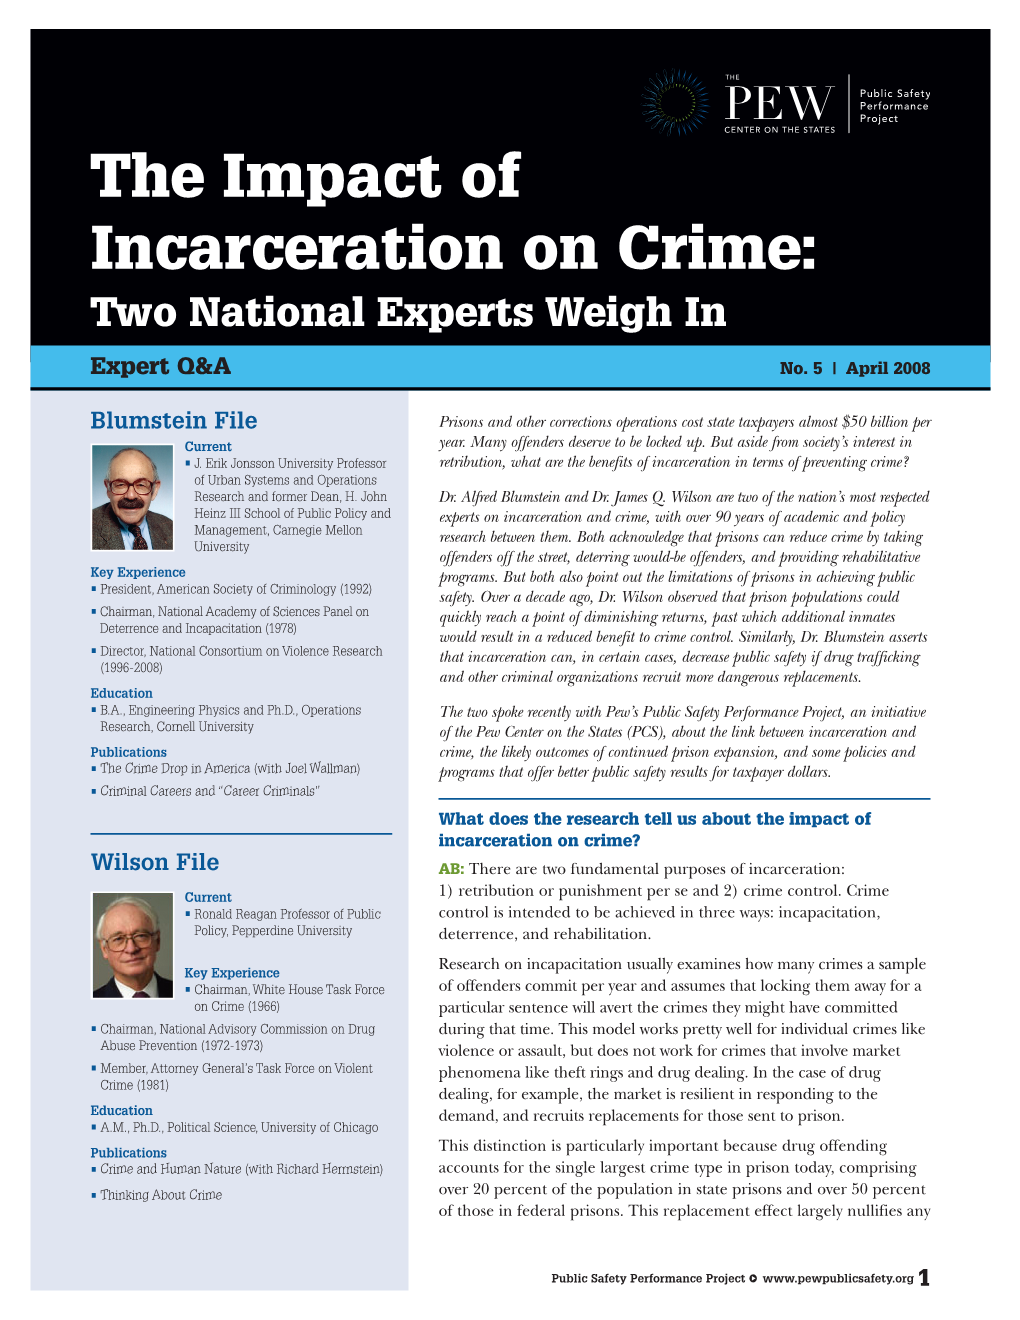 The Impact of Incarceration on Crime: Two National Experts Weigh In